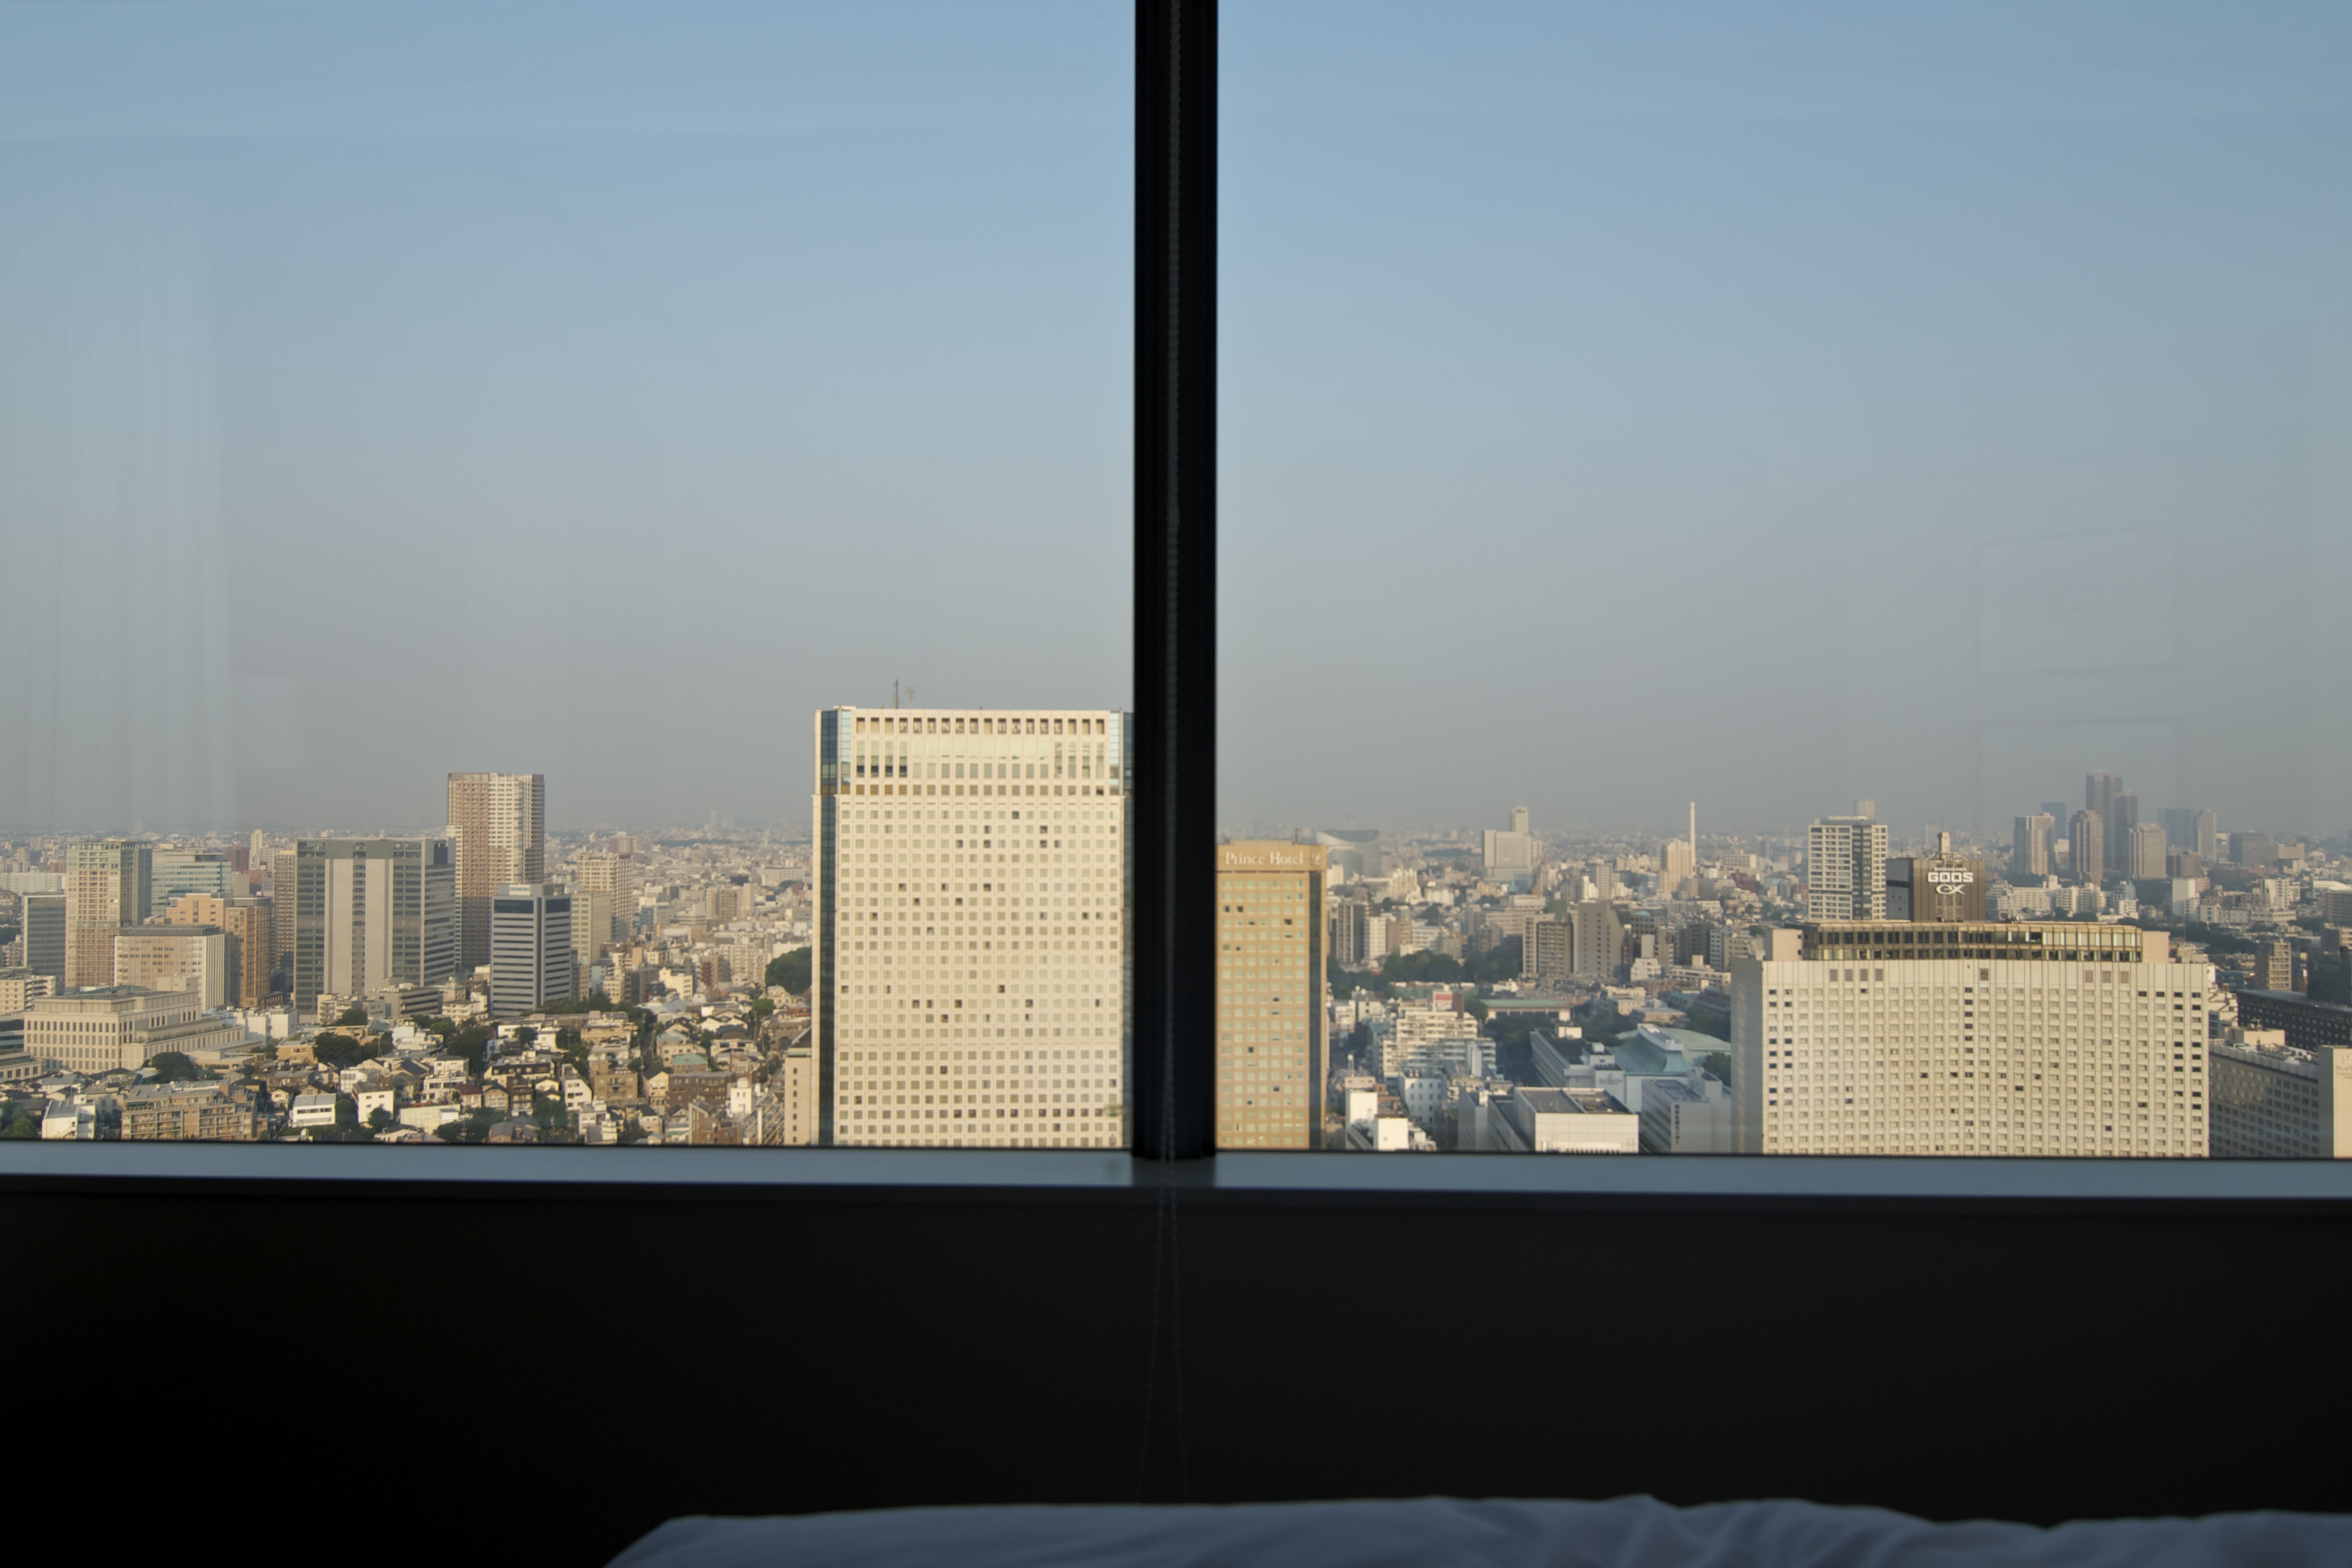 Tokyo's top hotels from moderate to ridiculous in price